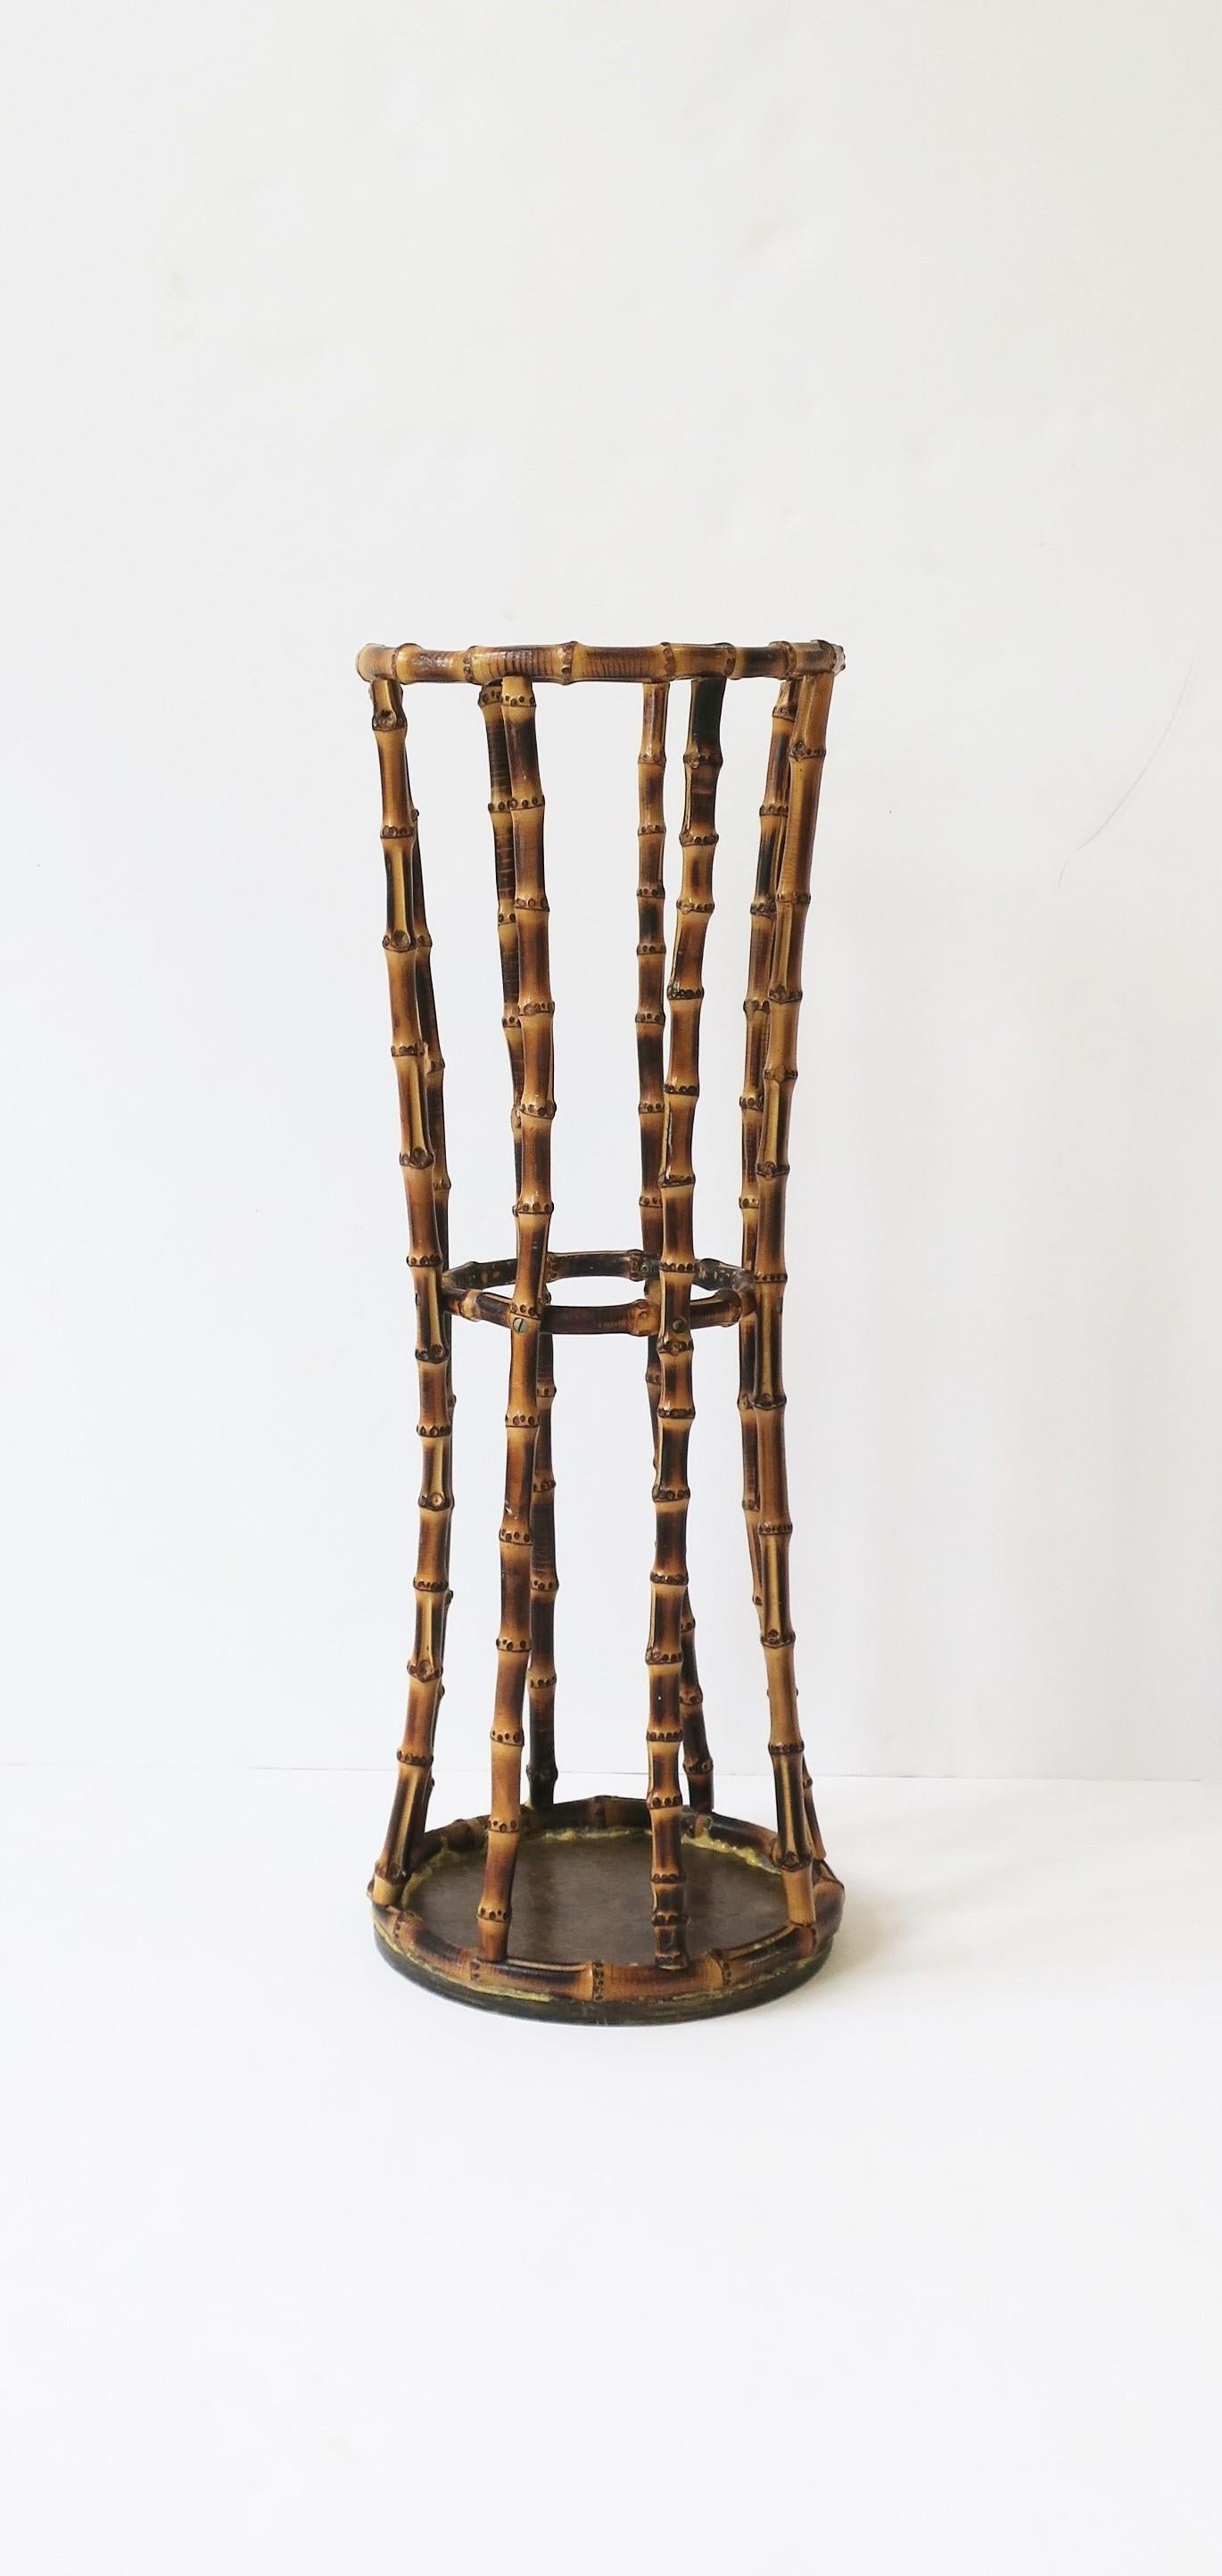 A bamboo umbrella holder stand with hourglass design in the style of Gucci, circa late-20th century. A great piece for home, office, etc. Dimensions: 9